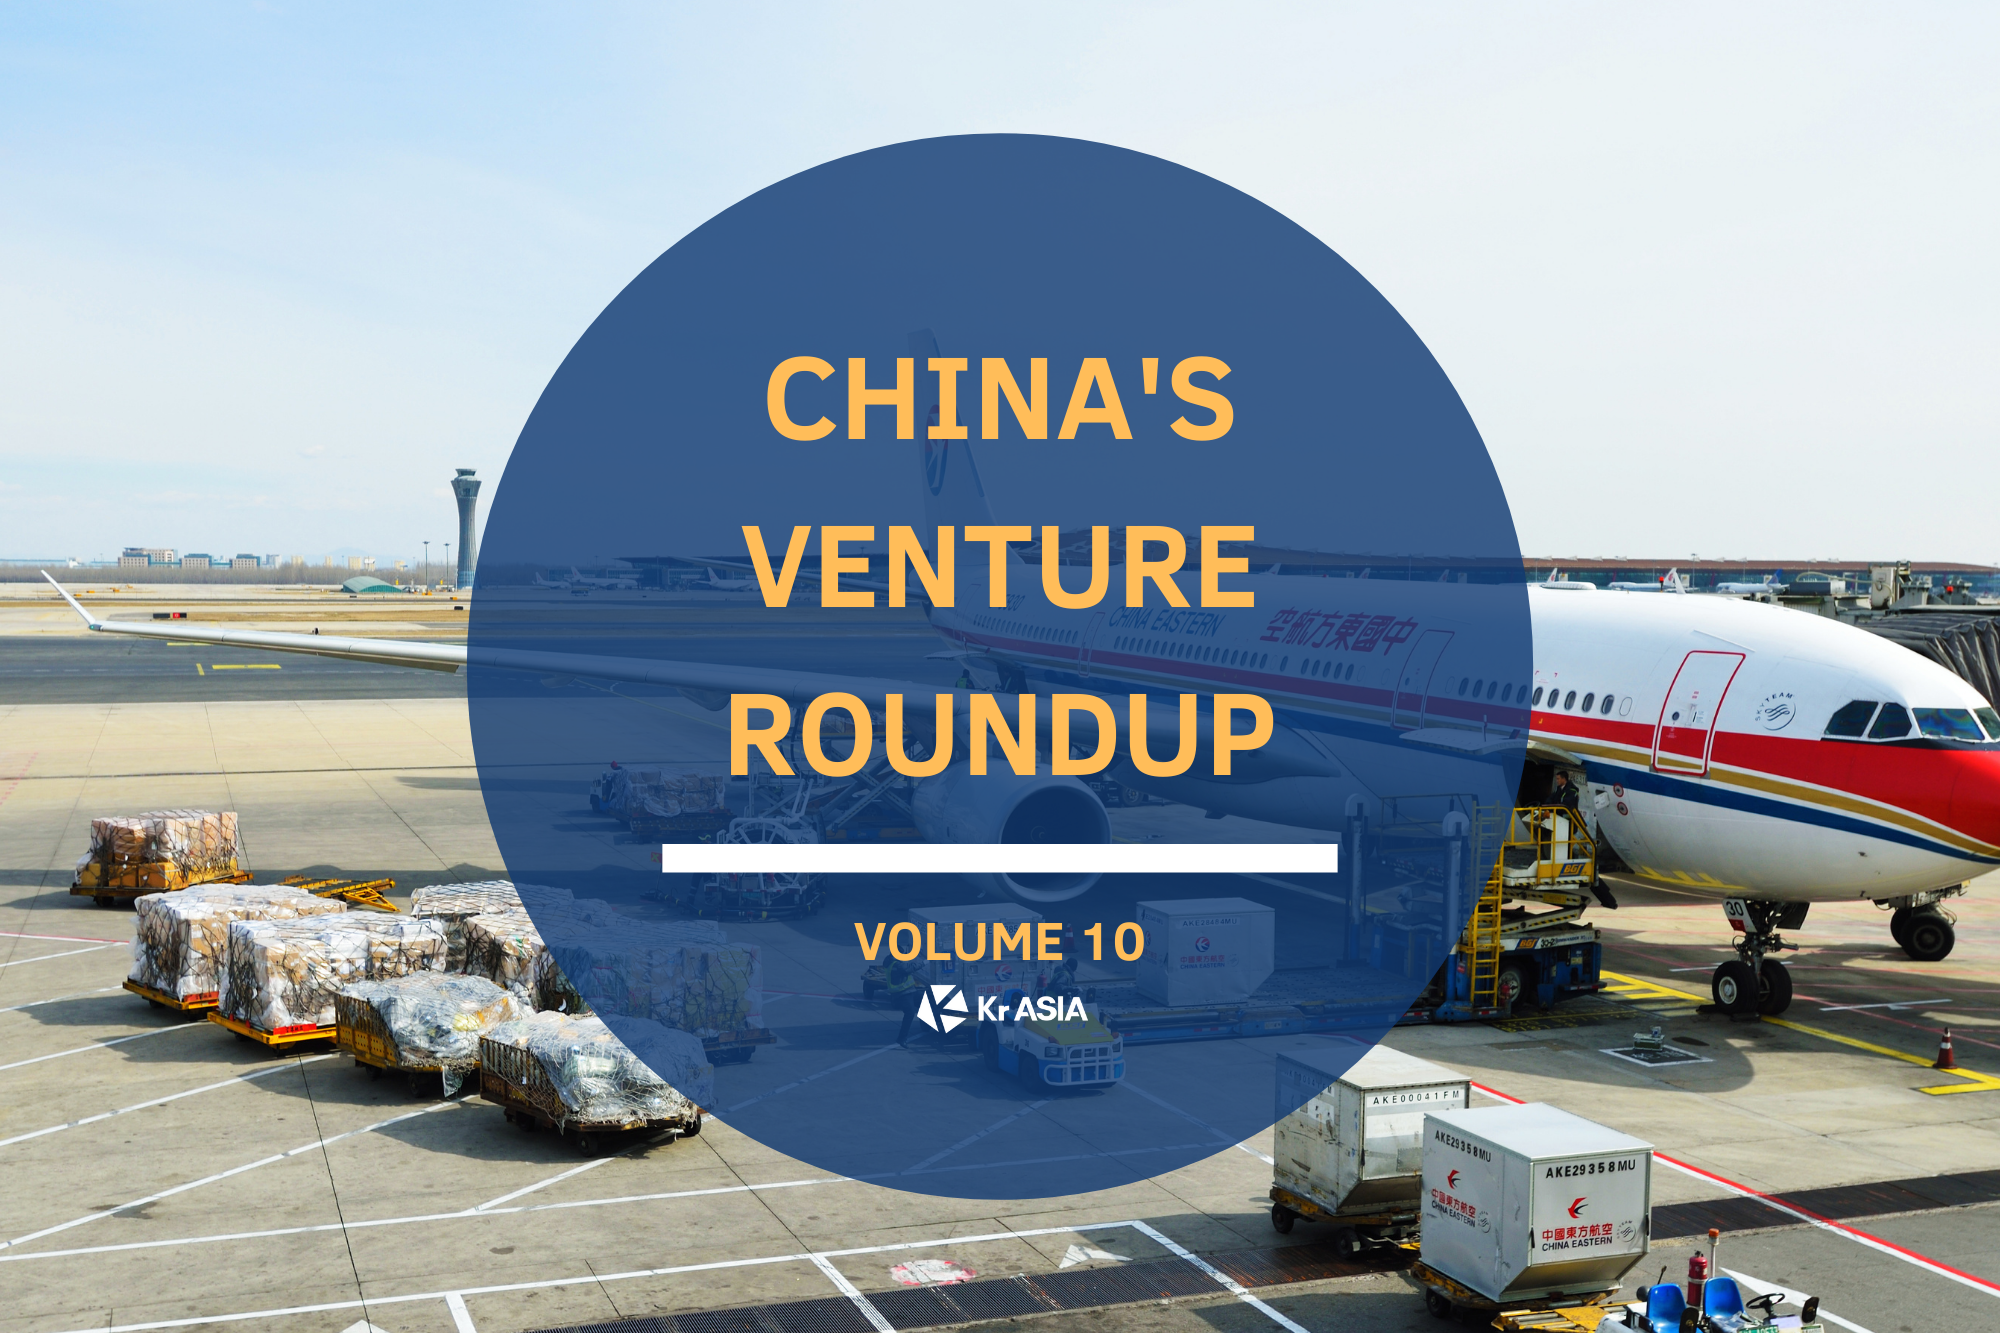 25 exits this week and Air China Cargo seeks growth through strategic diversification | China’s Venture Roundup Volume 10